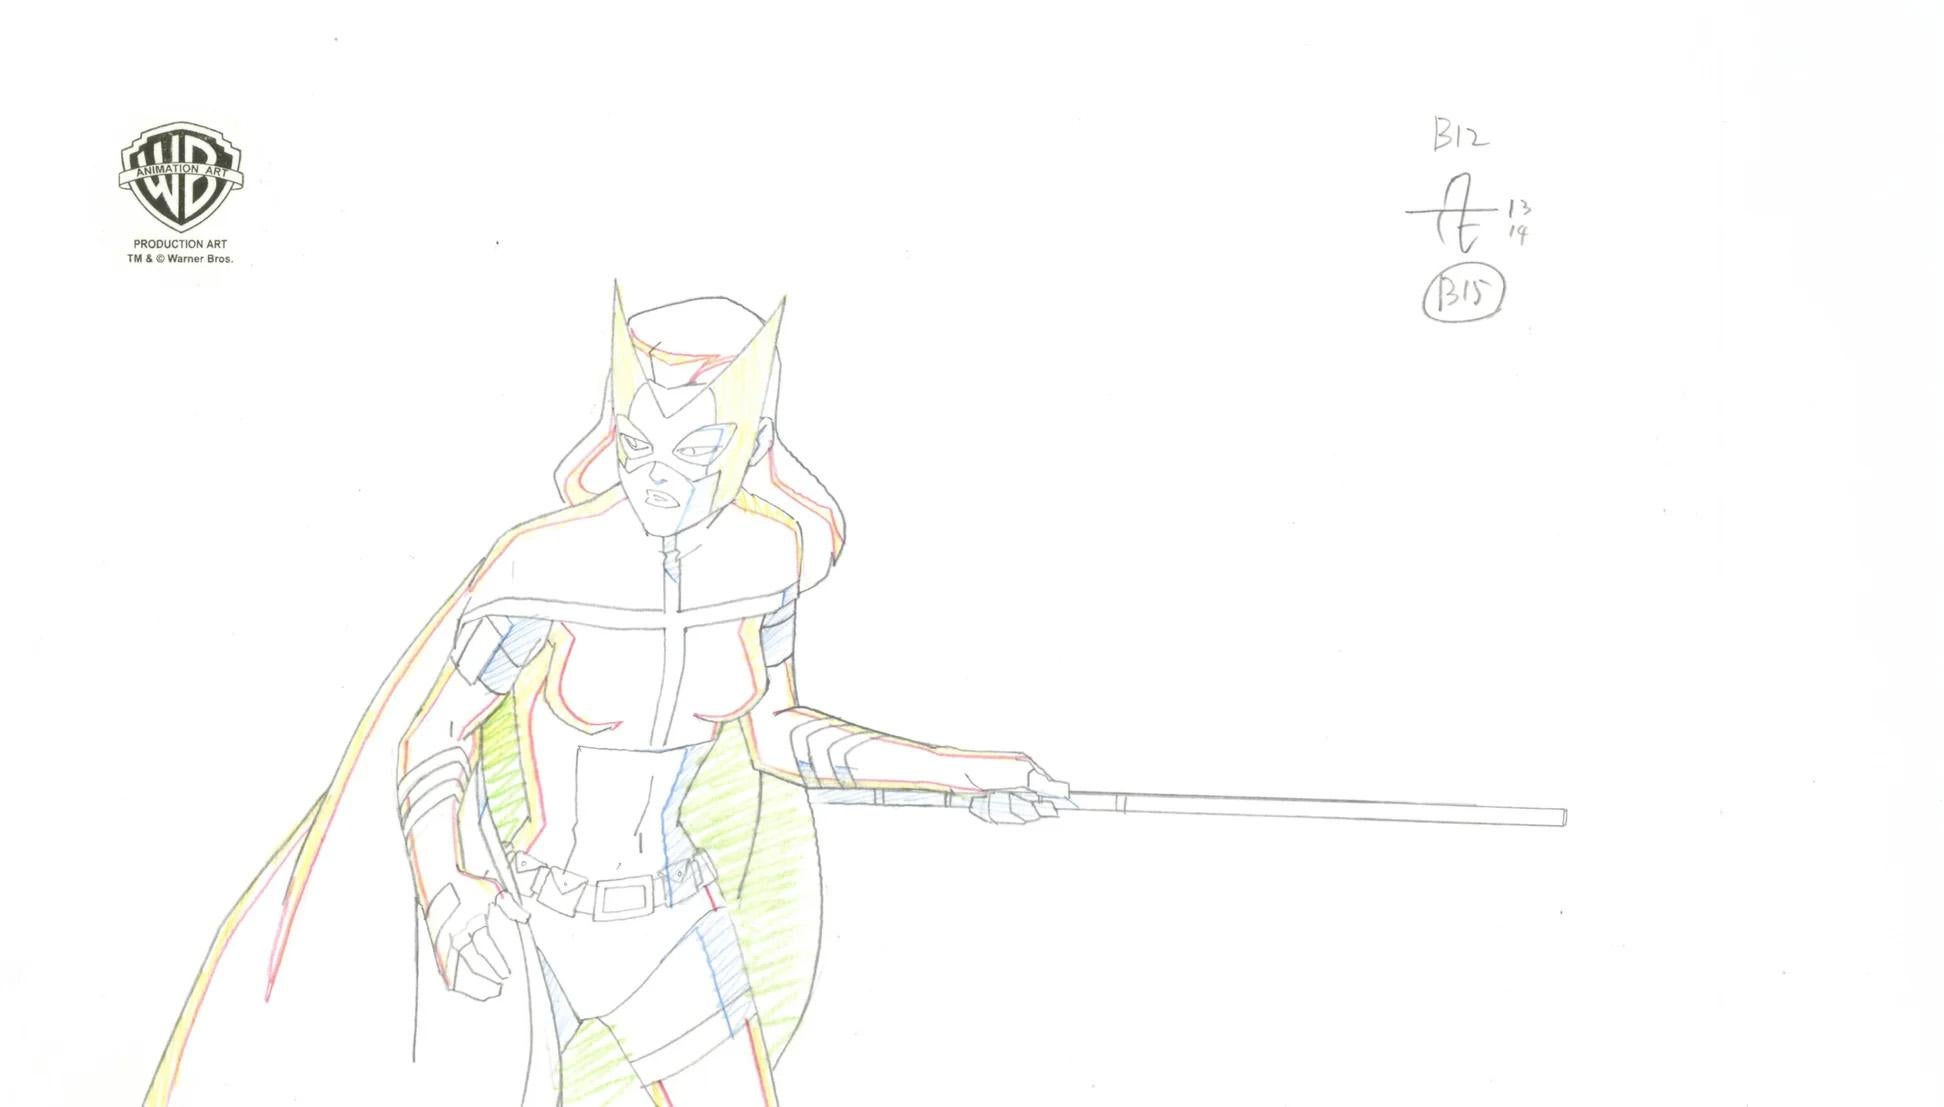 Justice League Unlimited Original Production Drawing: Huntress - Art by Warner Bros. Studio Artists